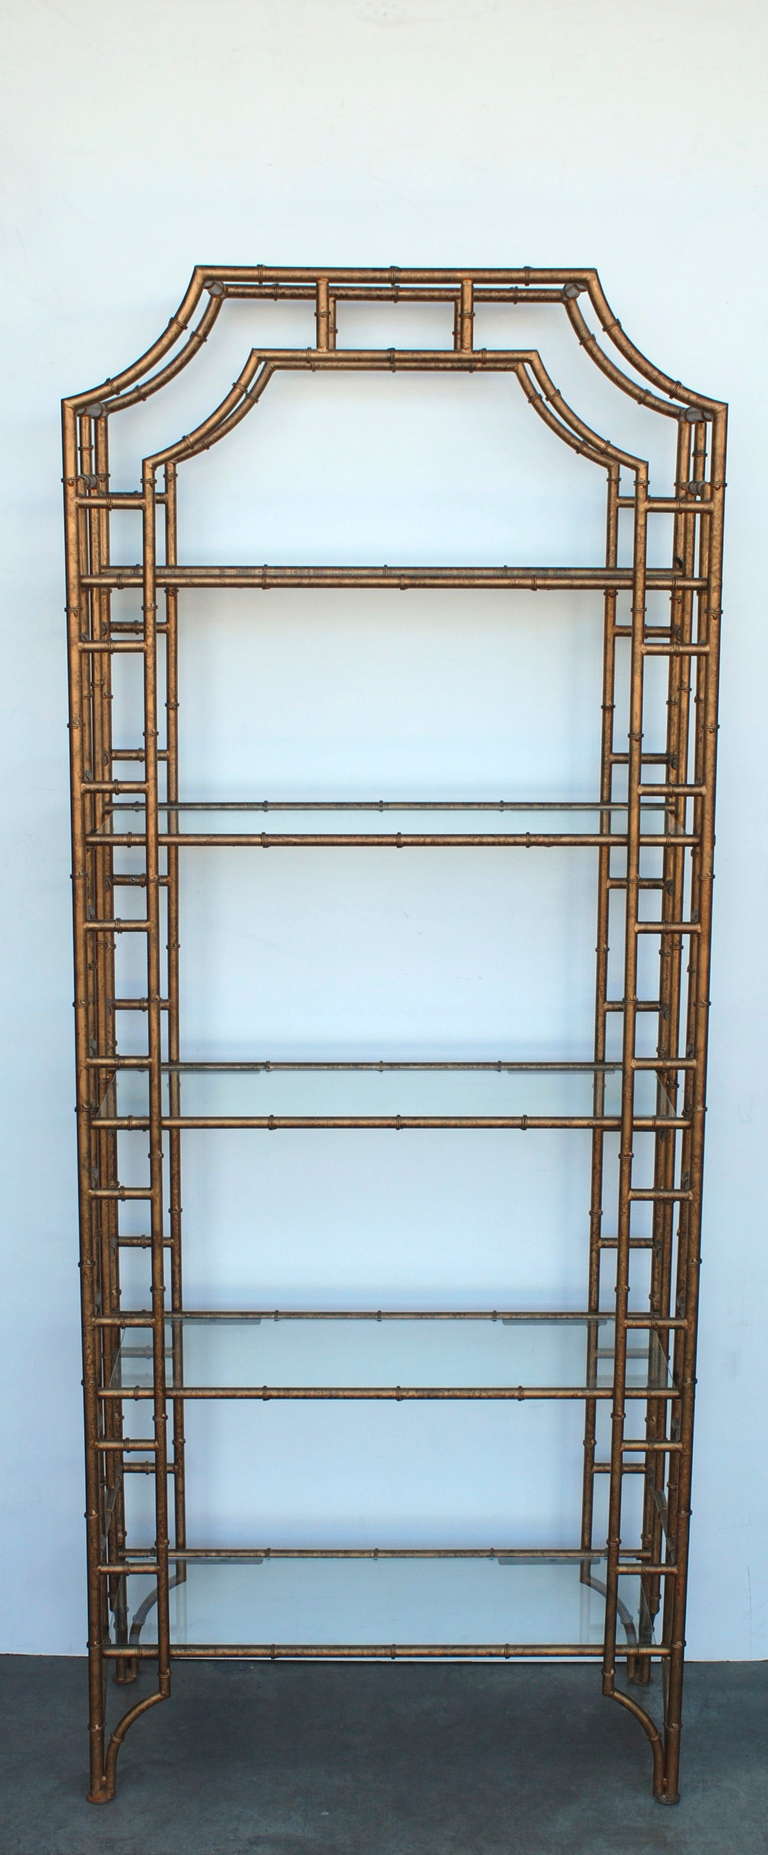 A nice pair of gilt metal faux bamboo etageres.  The metal gilding has a nice bronze shade to it.  Each etagere has five shelves. There are screw holes on the back section to secure to the wall if so desired.